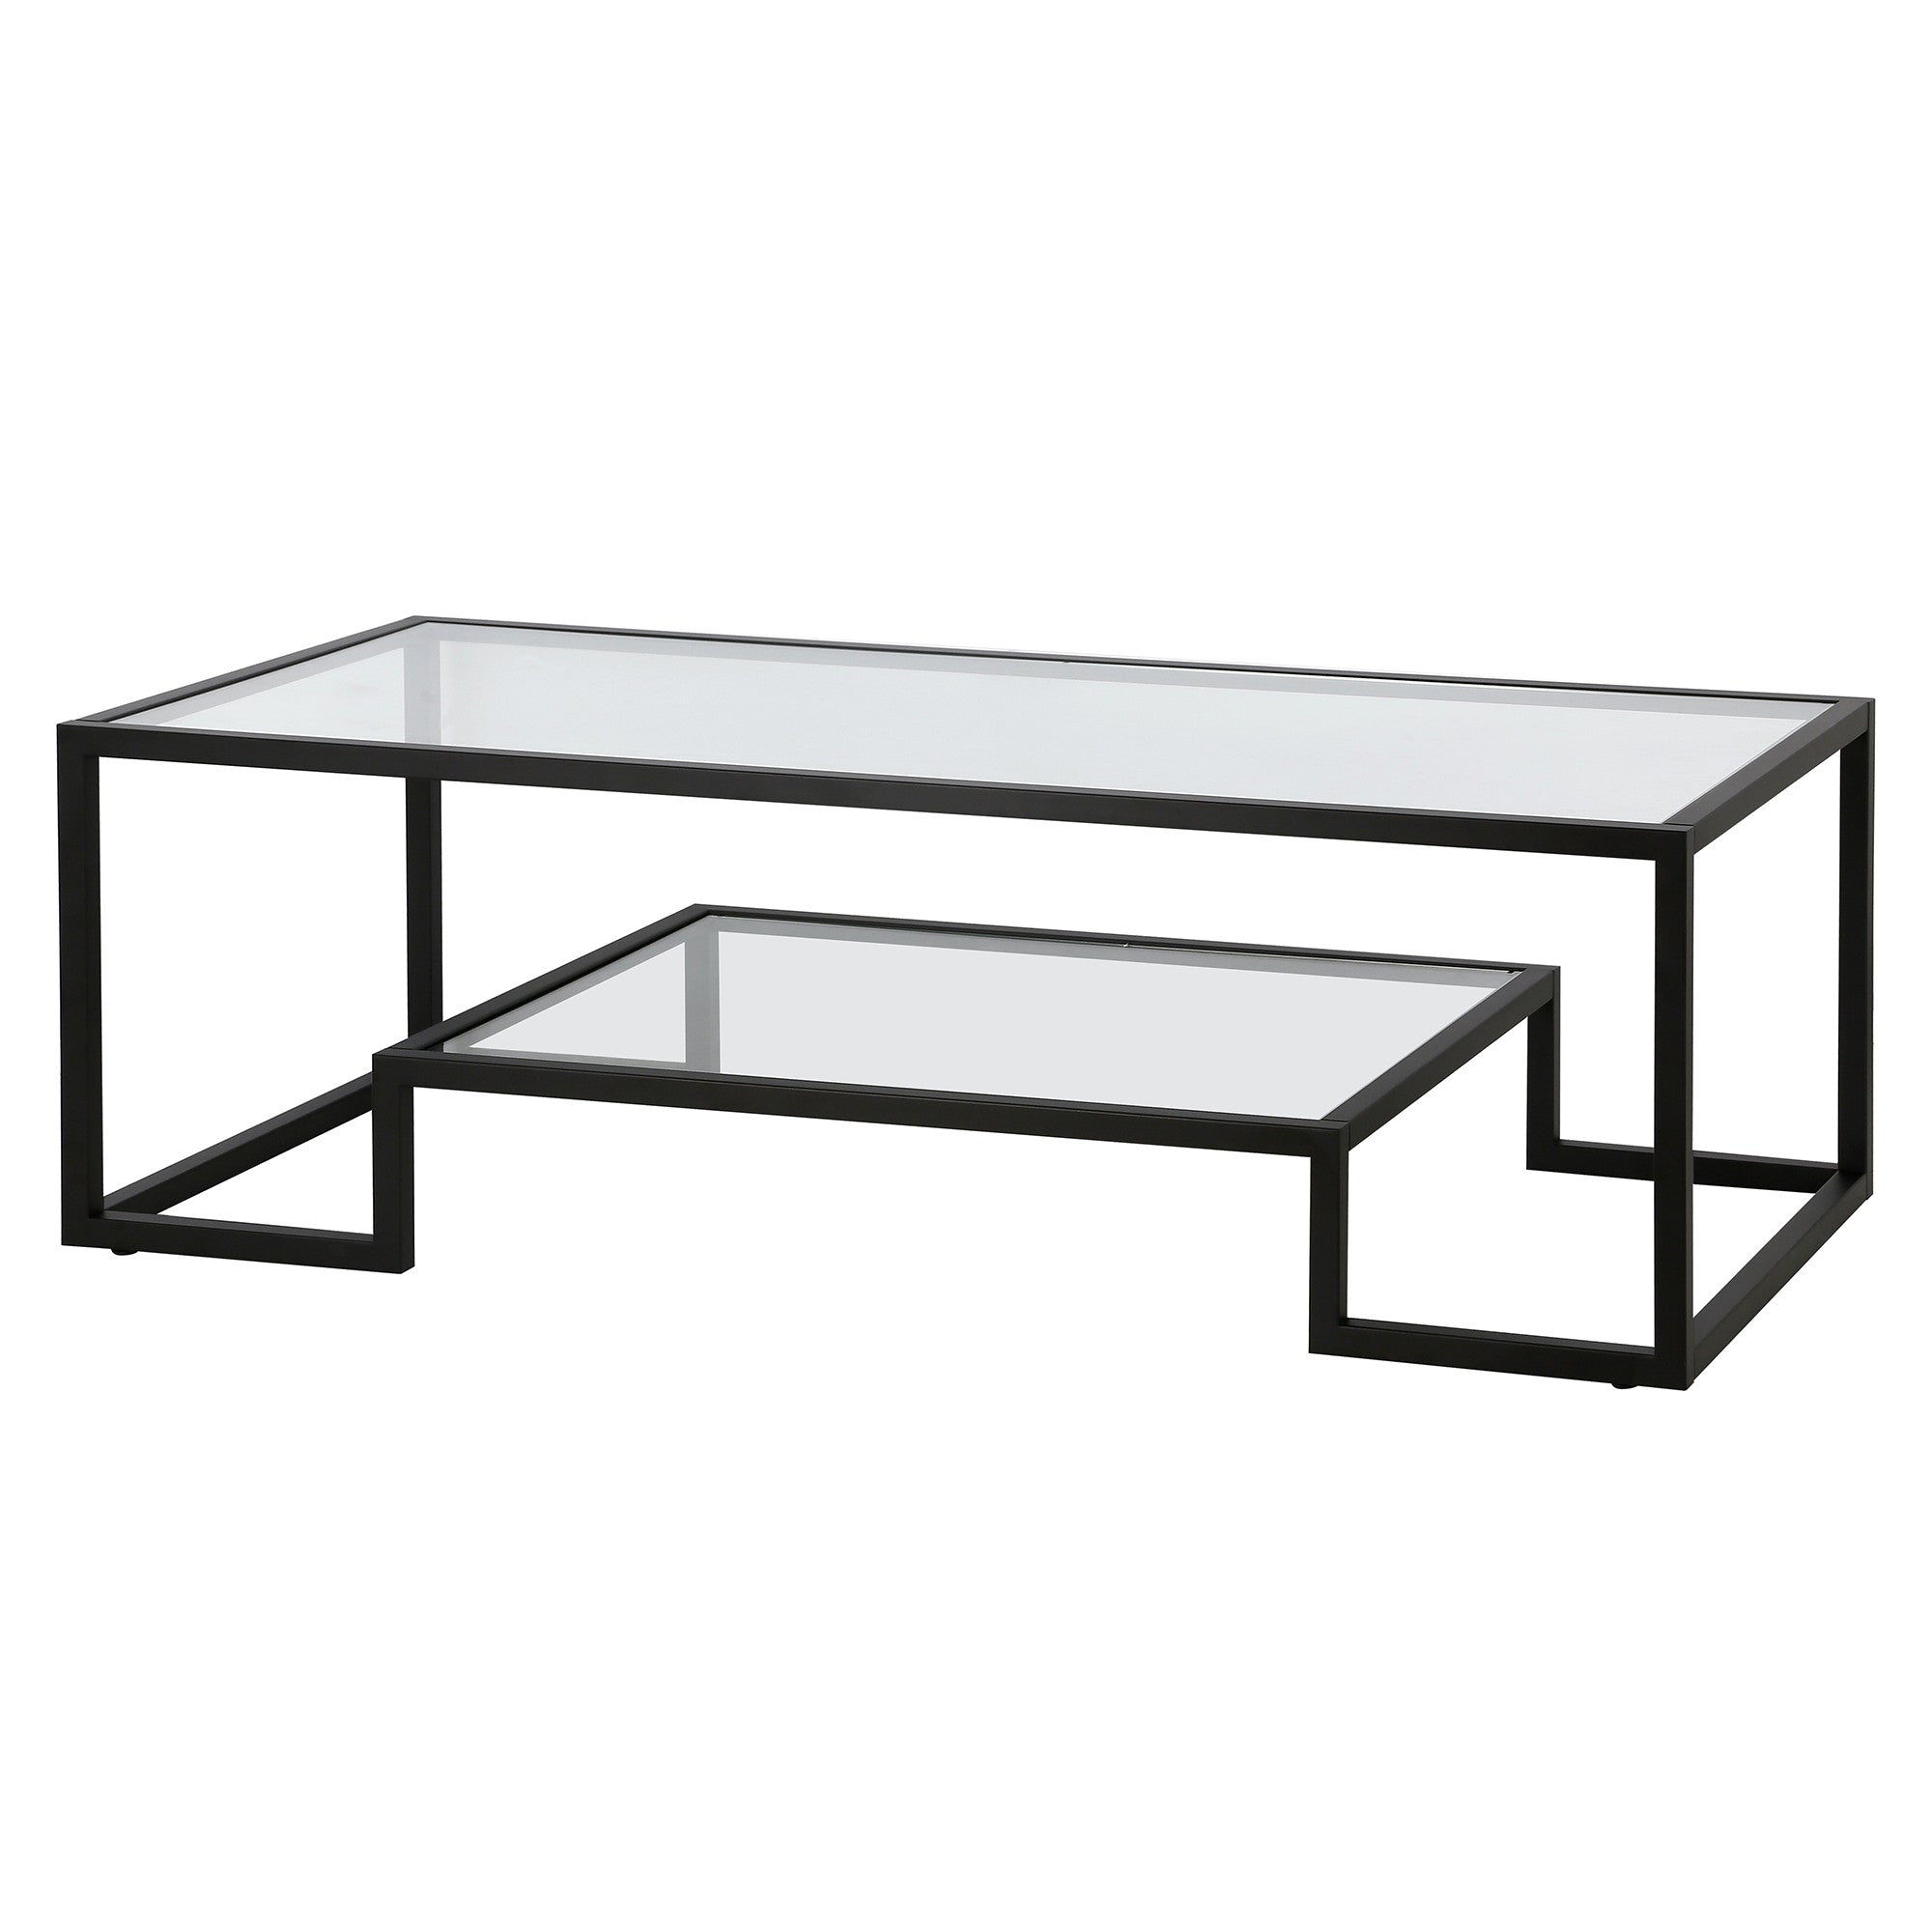 54" Black Glass And Steel Coffee Table With Shelf